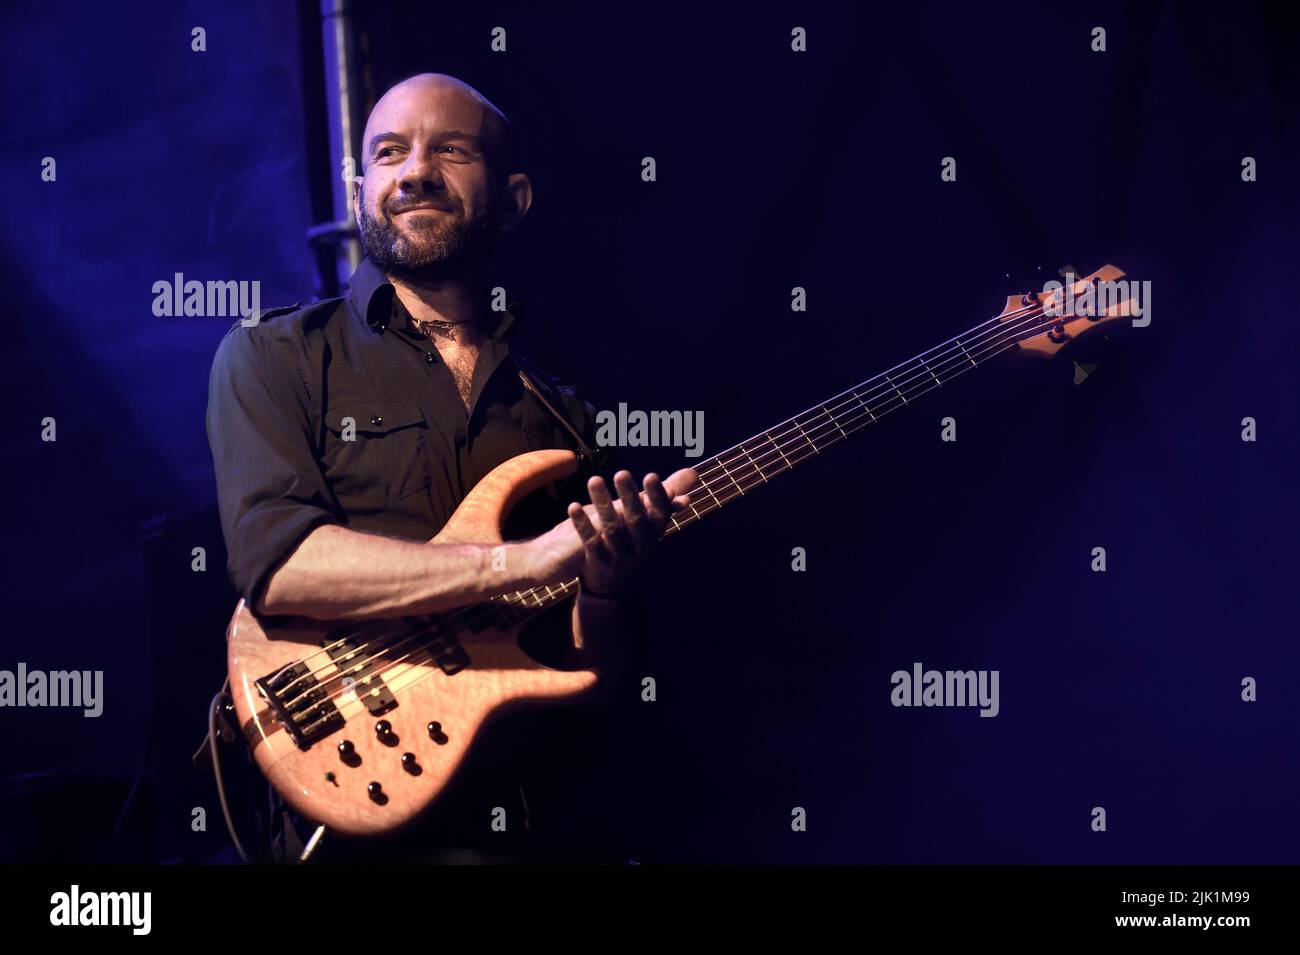 Rome, Italy. 29th July, 2022. Stefano Casali during the Valmontone Outlet Summer Festival concert. Valmontone (Rome) Italy. July 29, 2022 Fabio Concato in Concert Credit: dpa/Alamy Live News Stock Photo